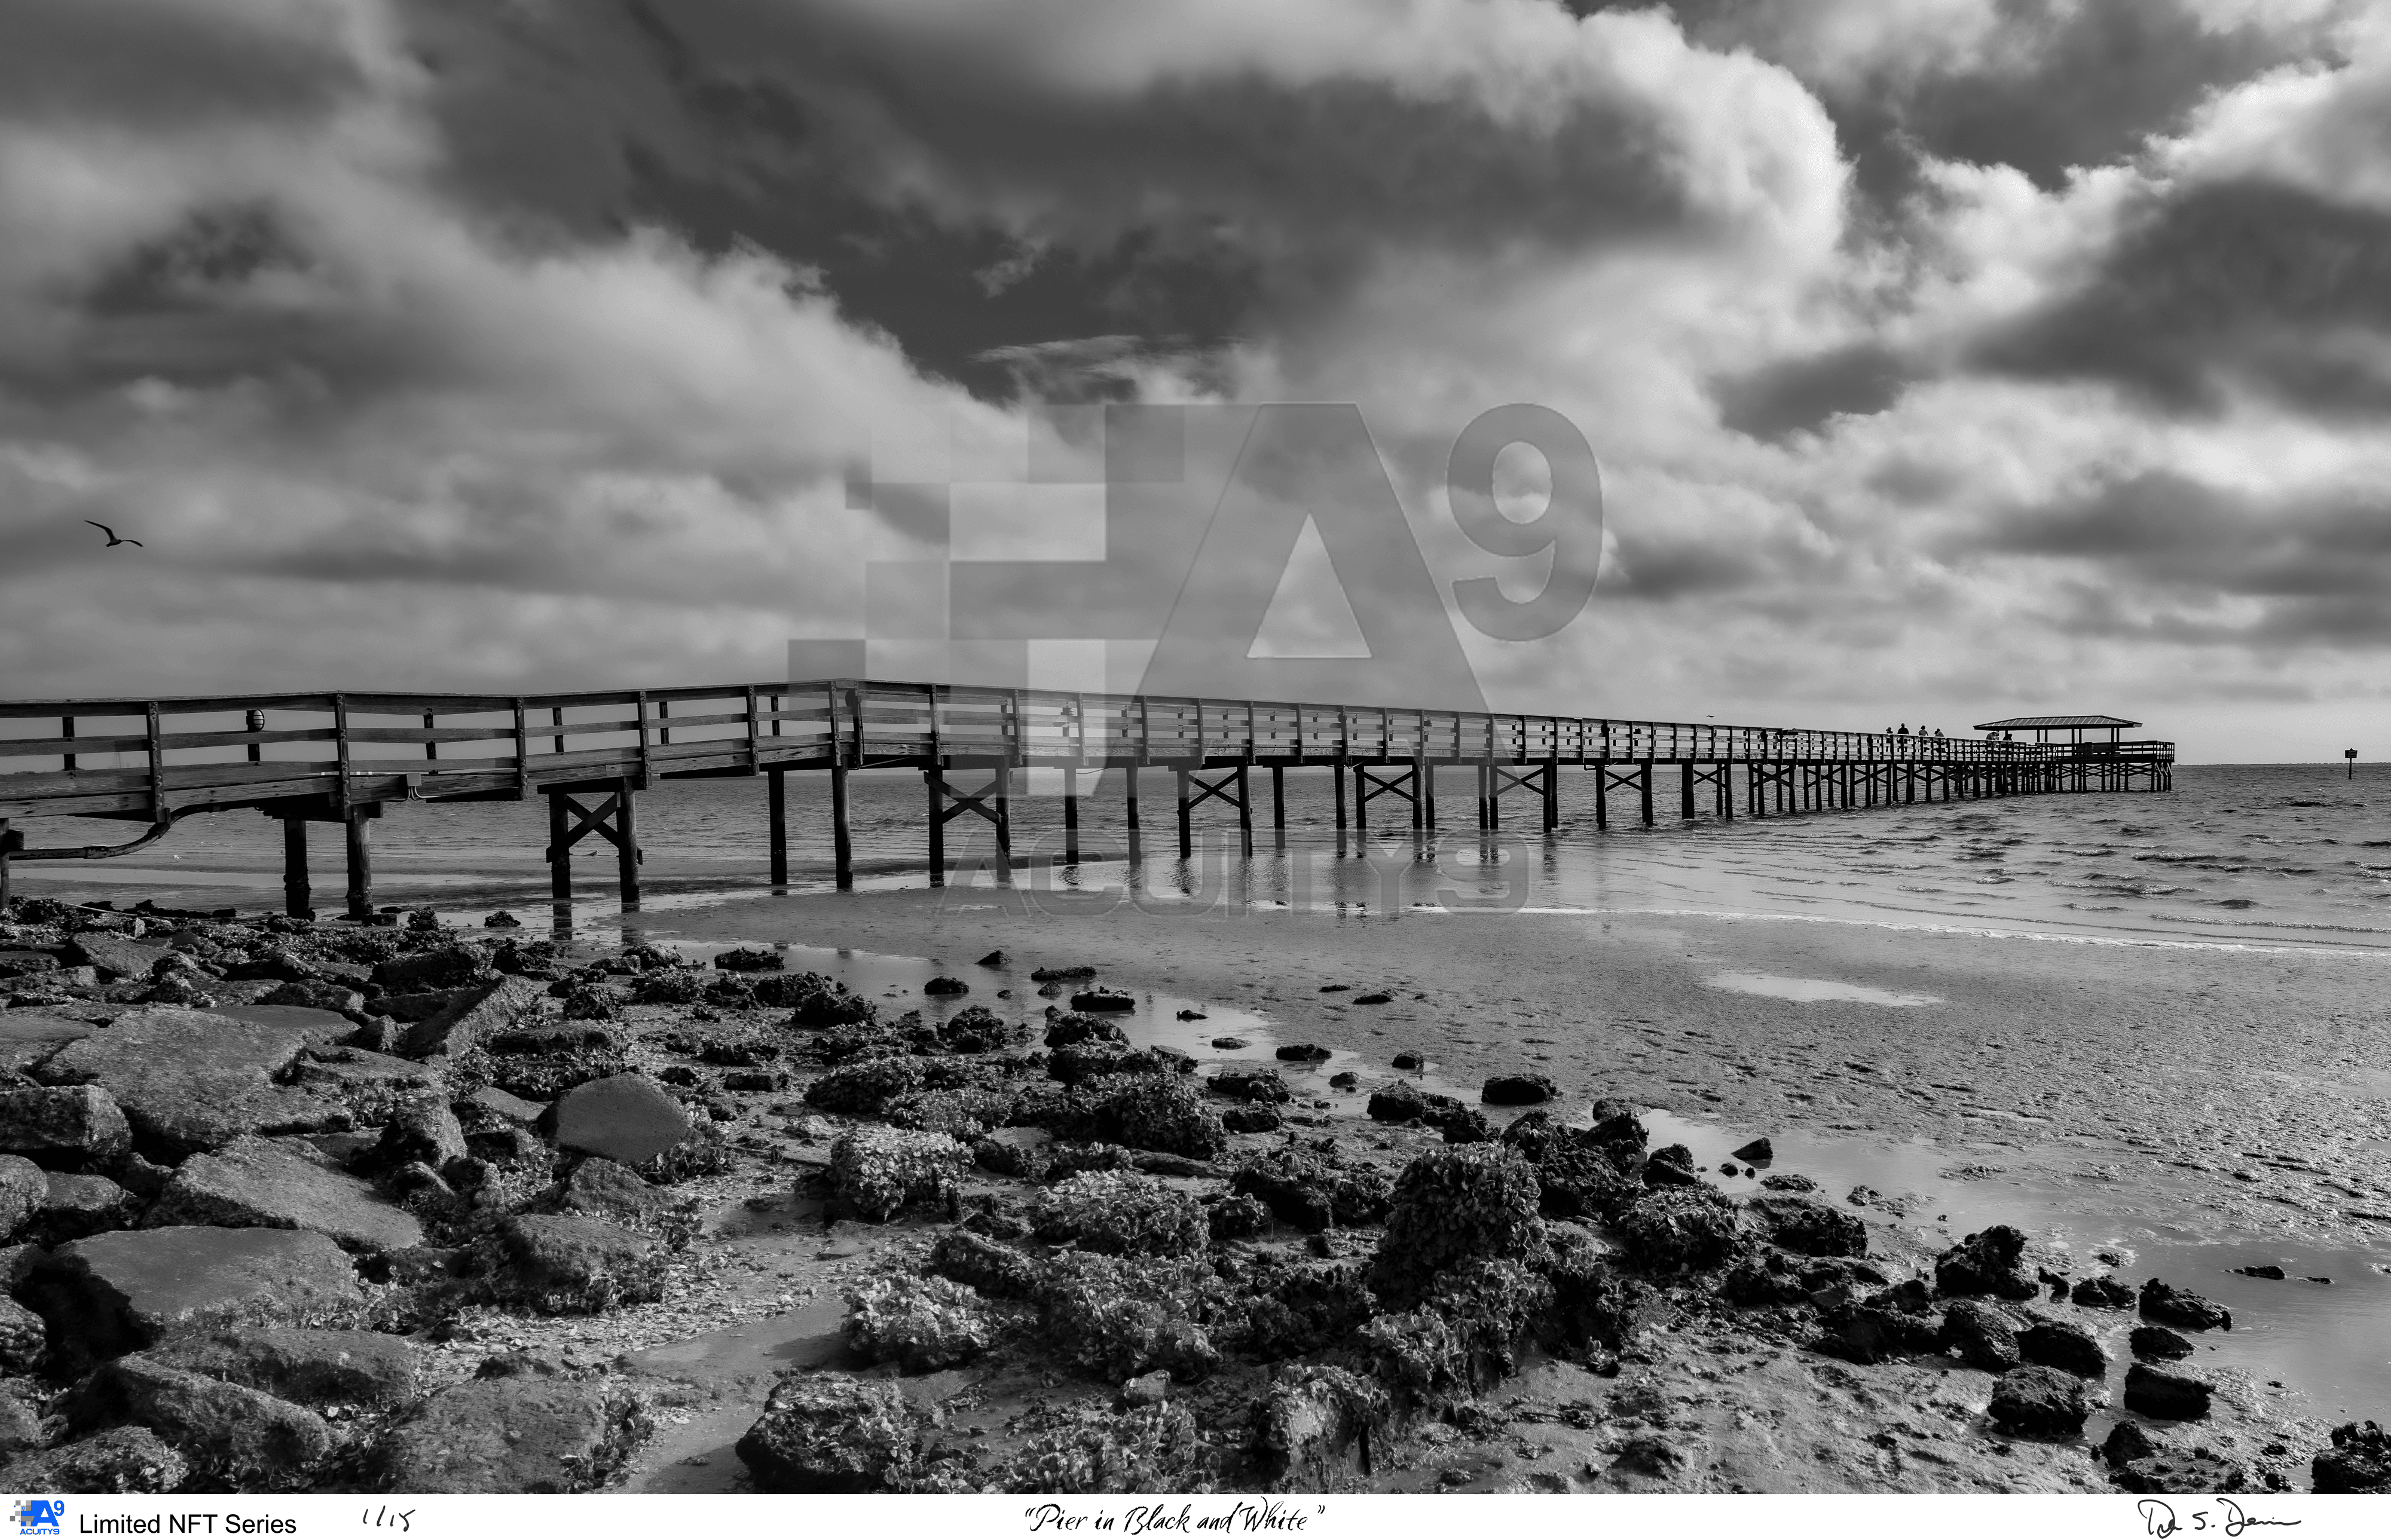 "Pier in Black and White"